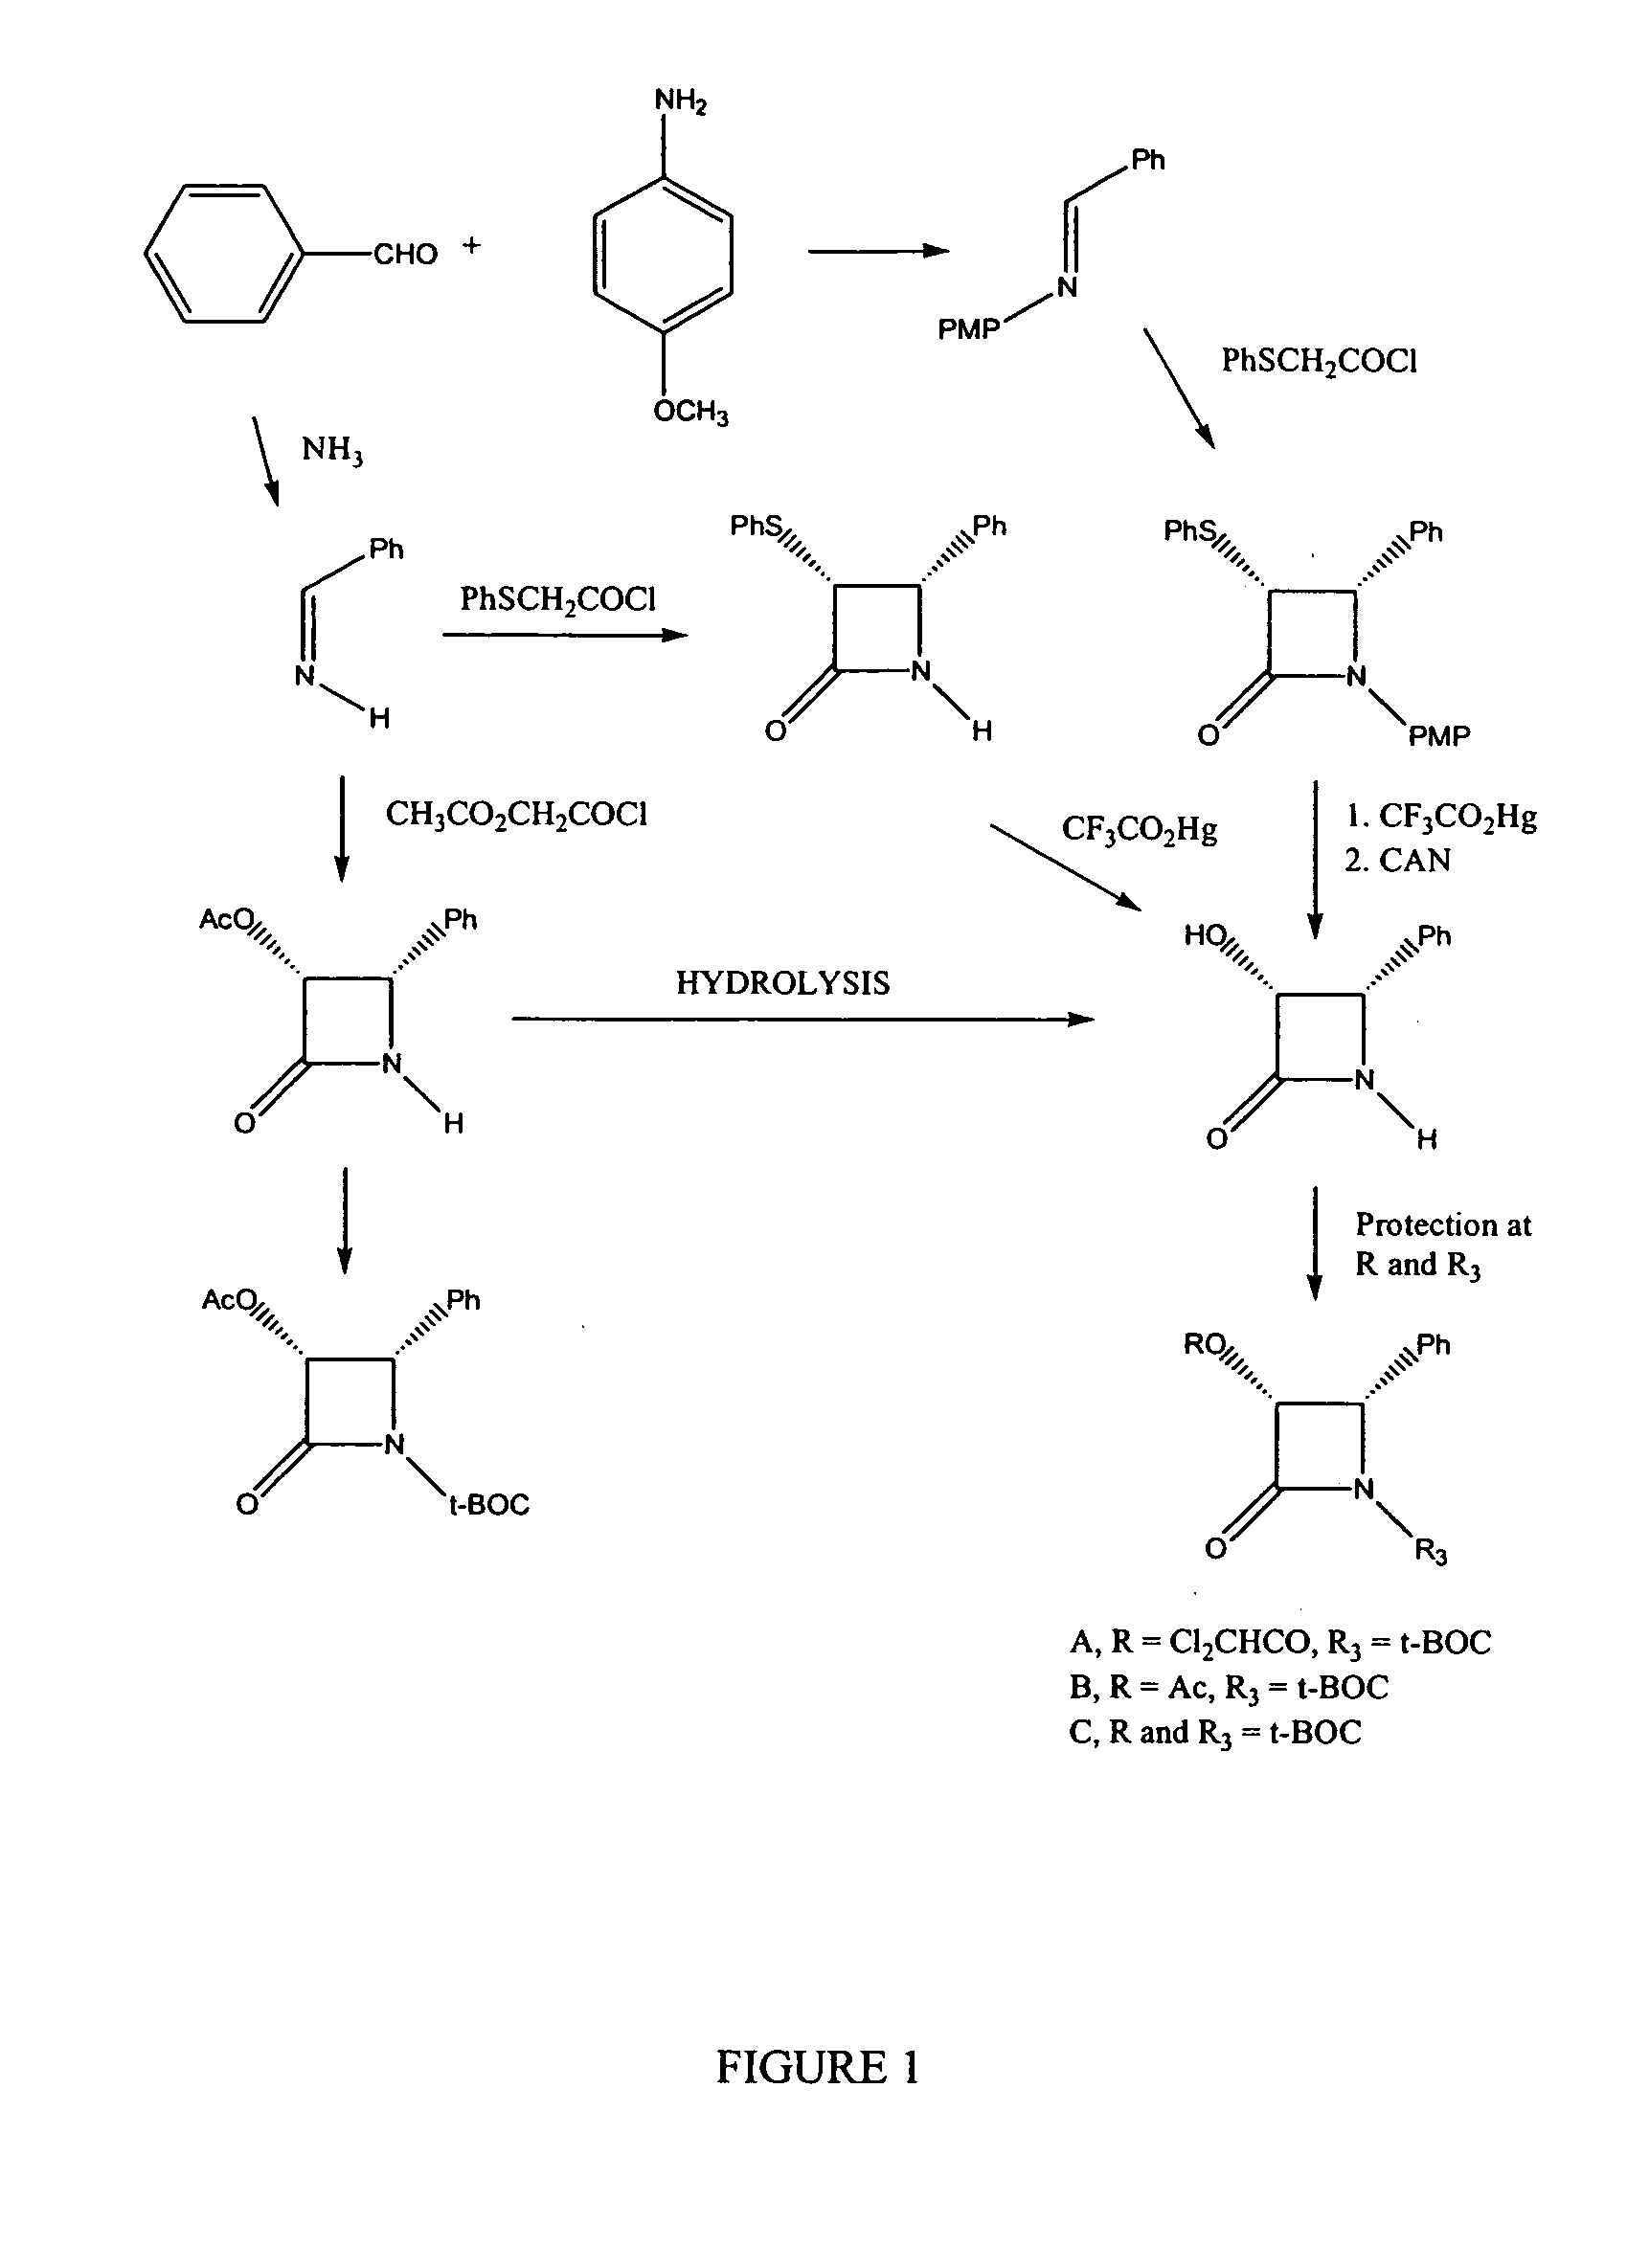 Semi-synthesis of taxane intermediates and their conversion to paclitaxel and docetaxel